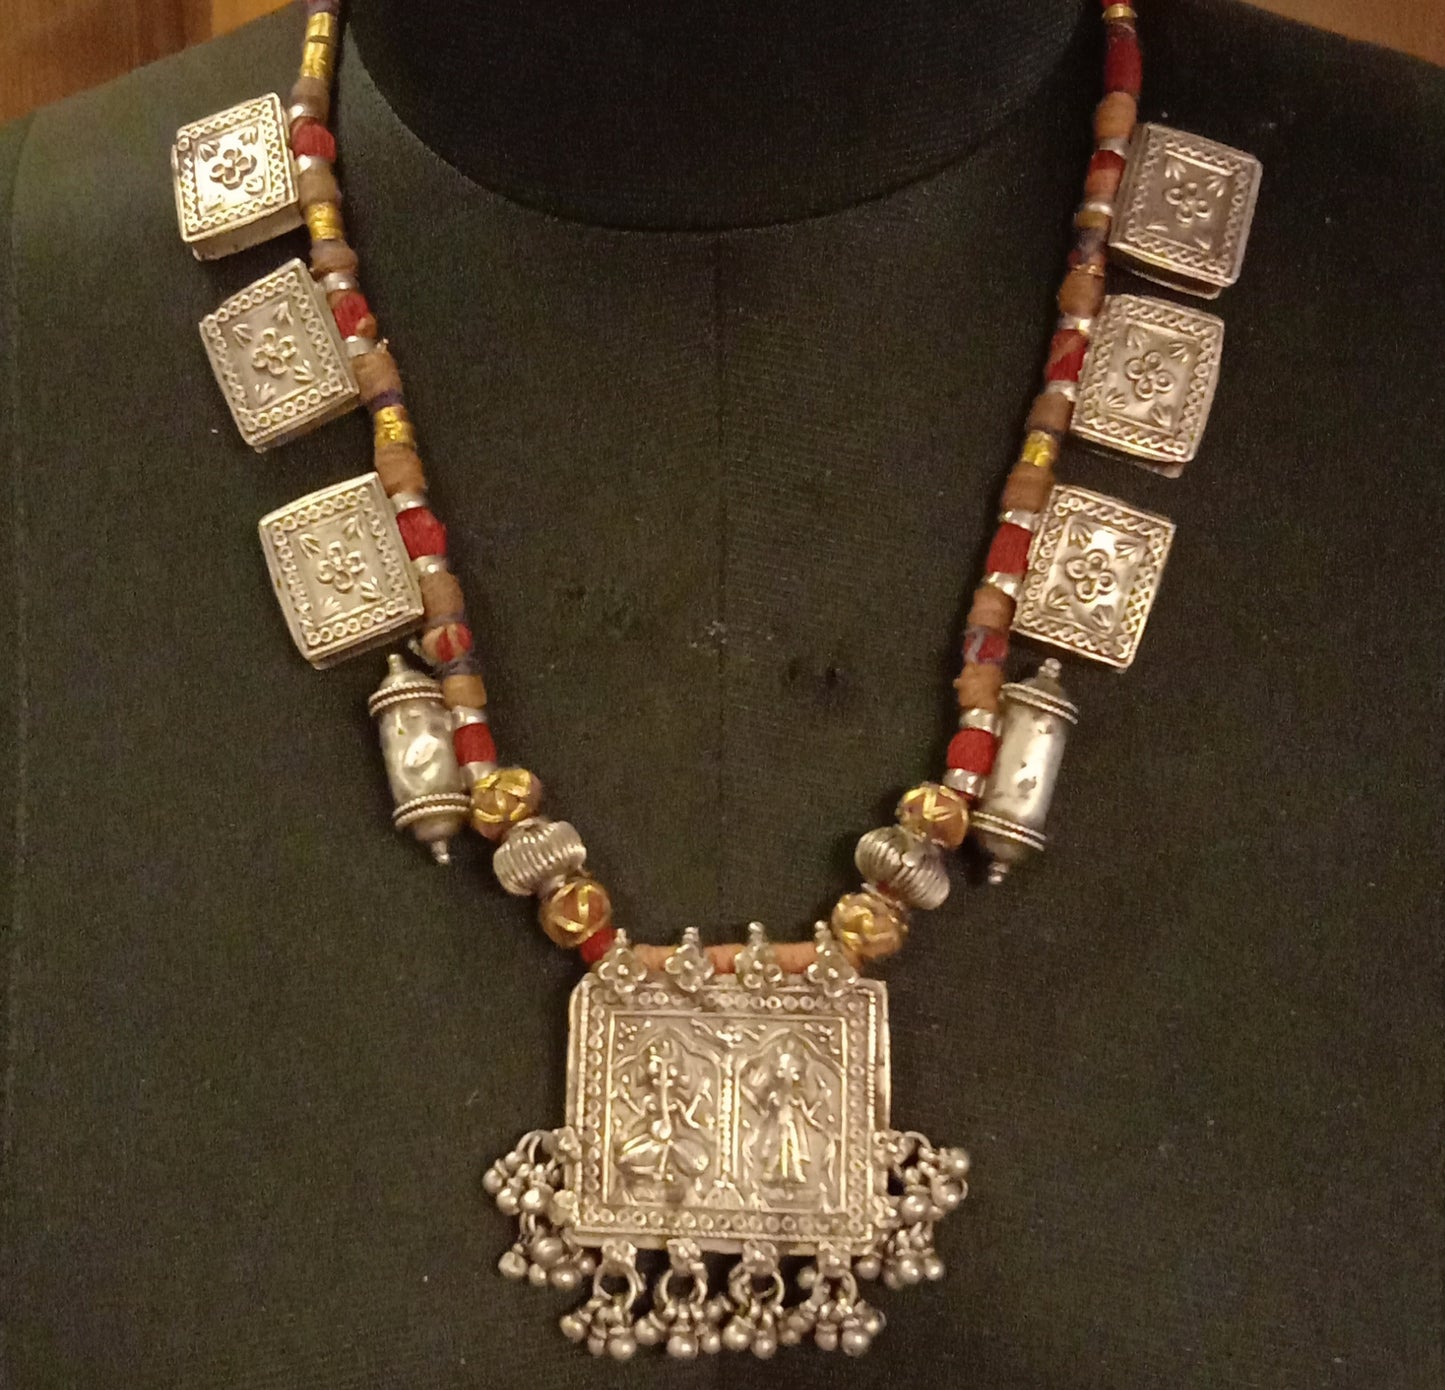 Tribal Necklace